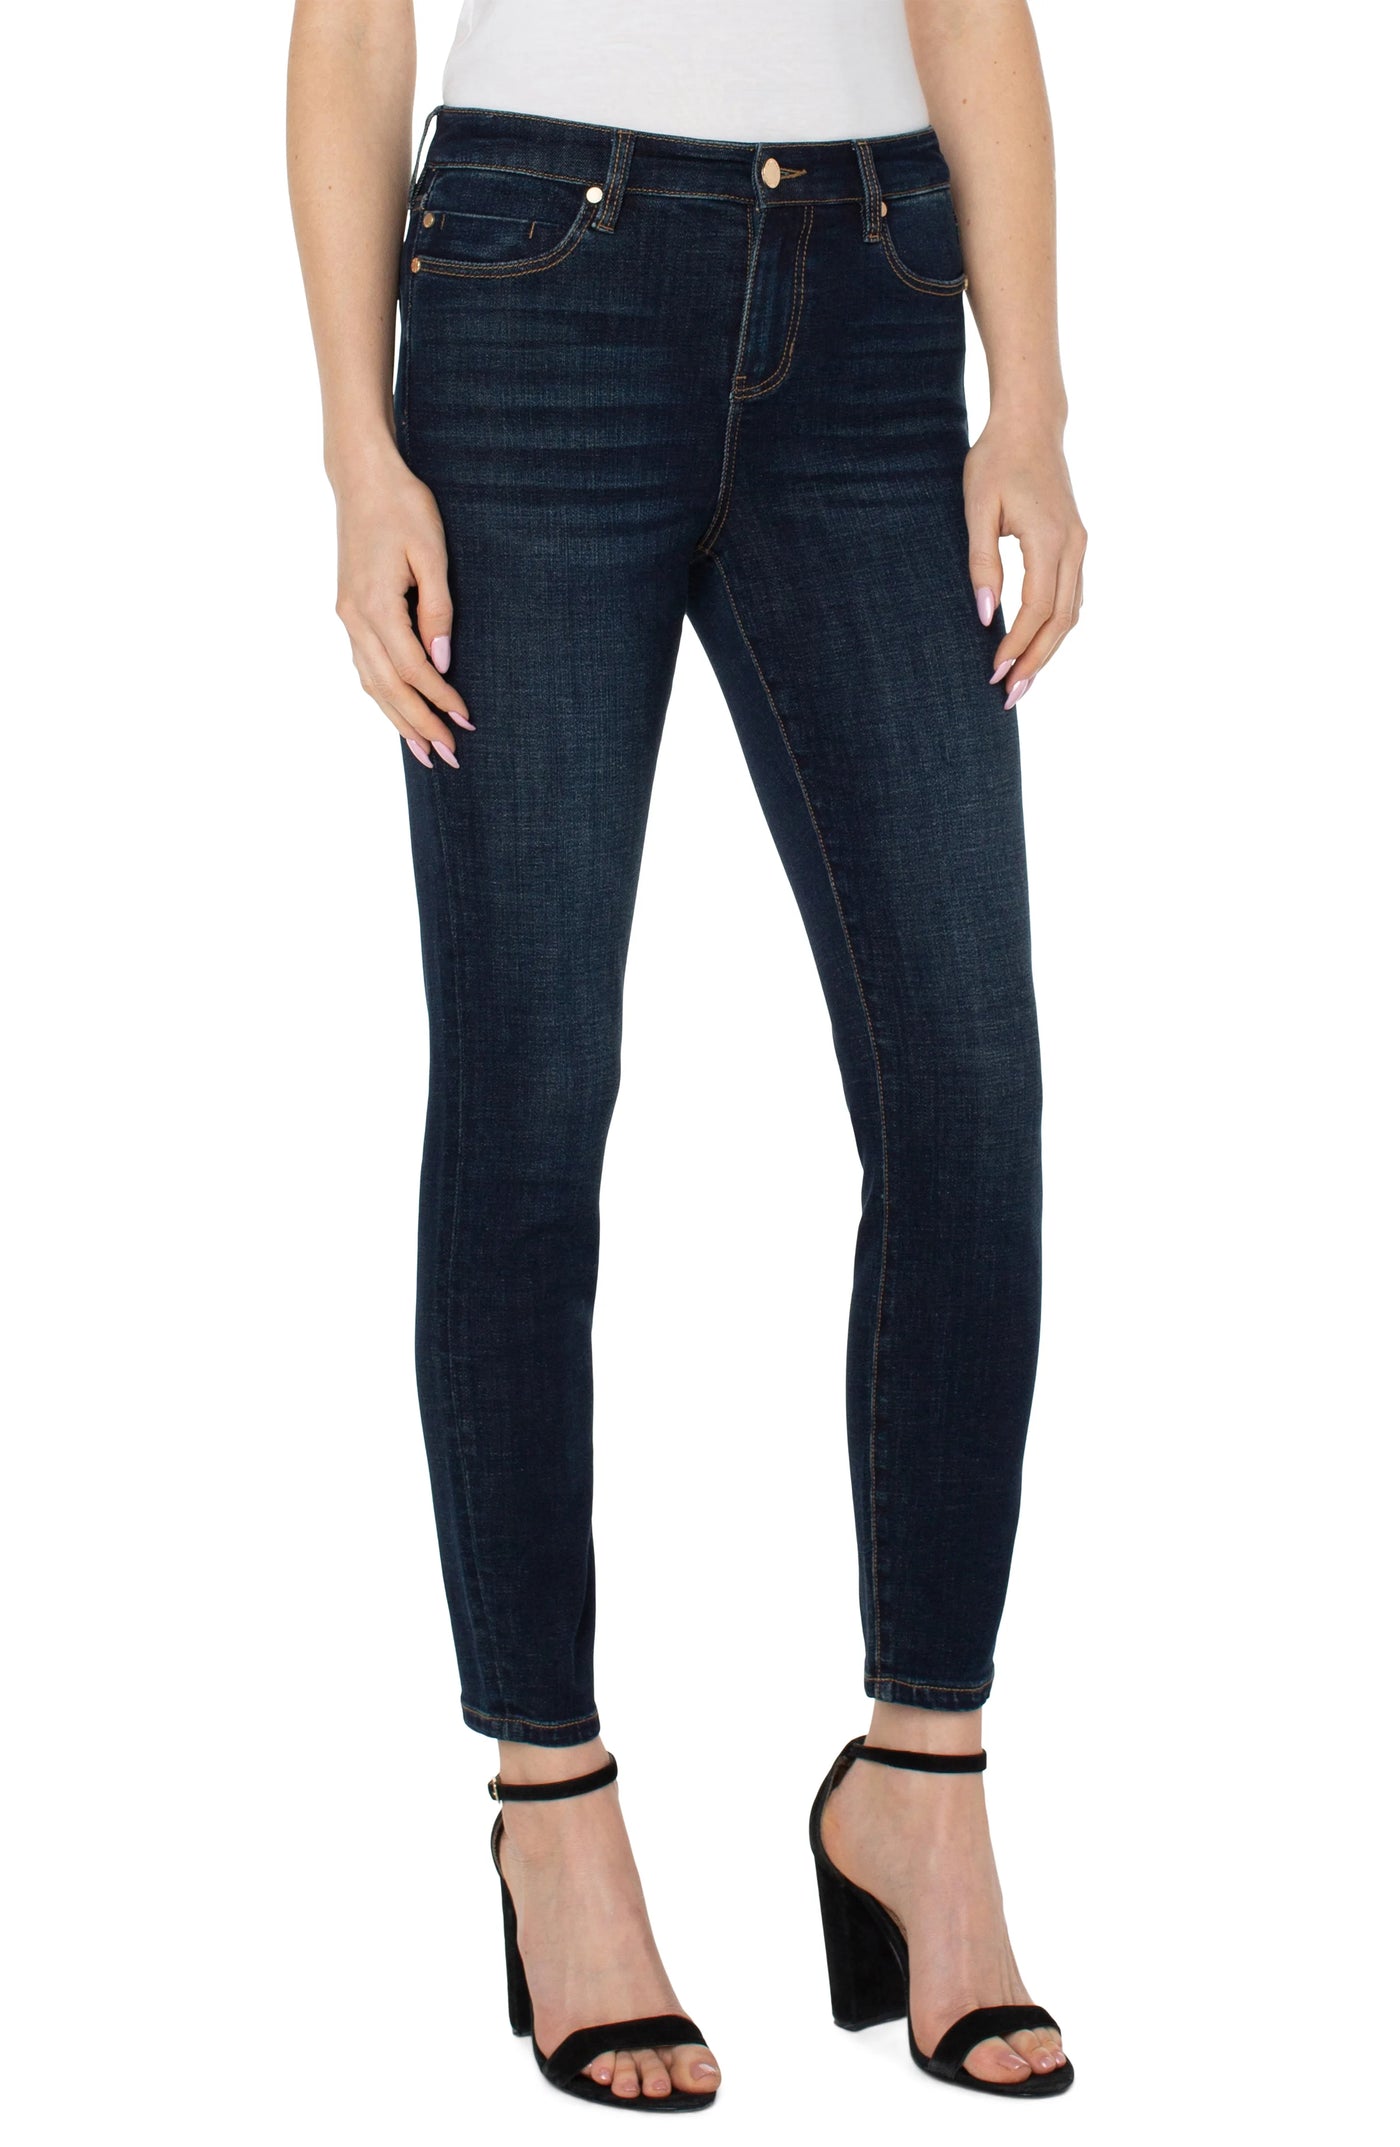 Abby Ankle Skinny Jeans in Eastmoor - Madison's Niche 